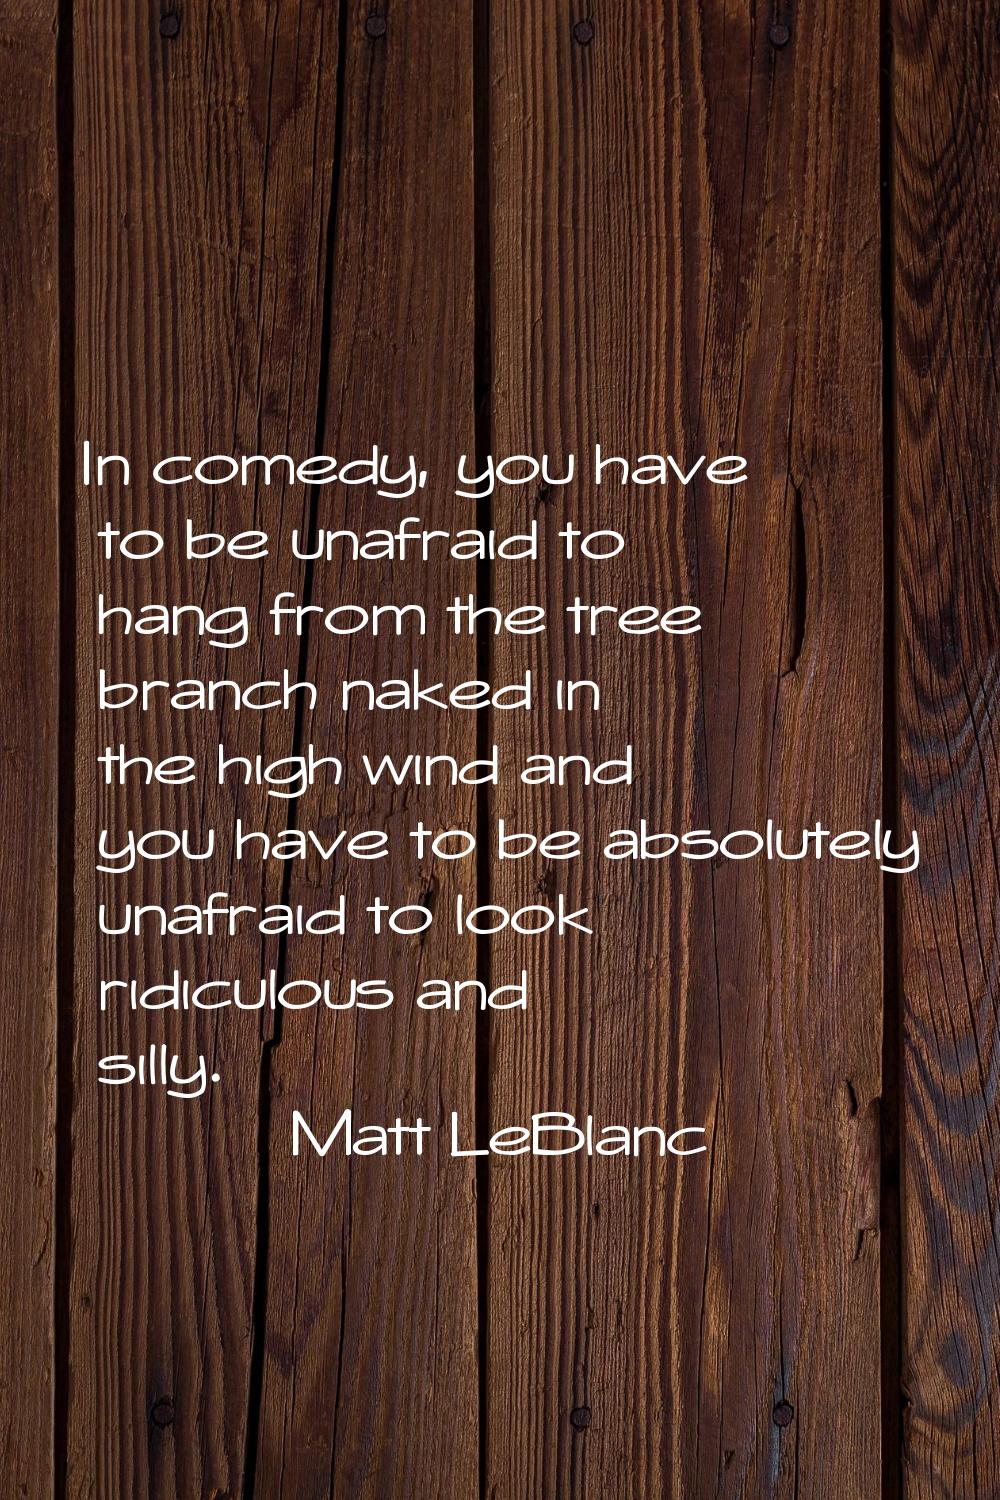 In comedy, you have to be unafraid to hang from the tree branch naked in the high wind and you have